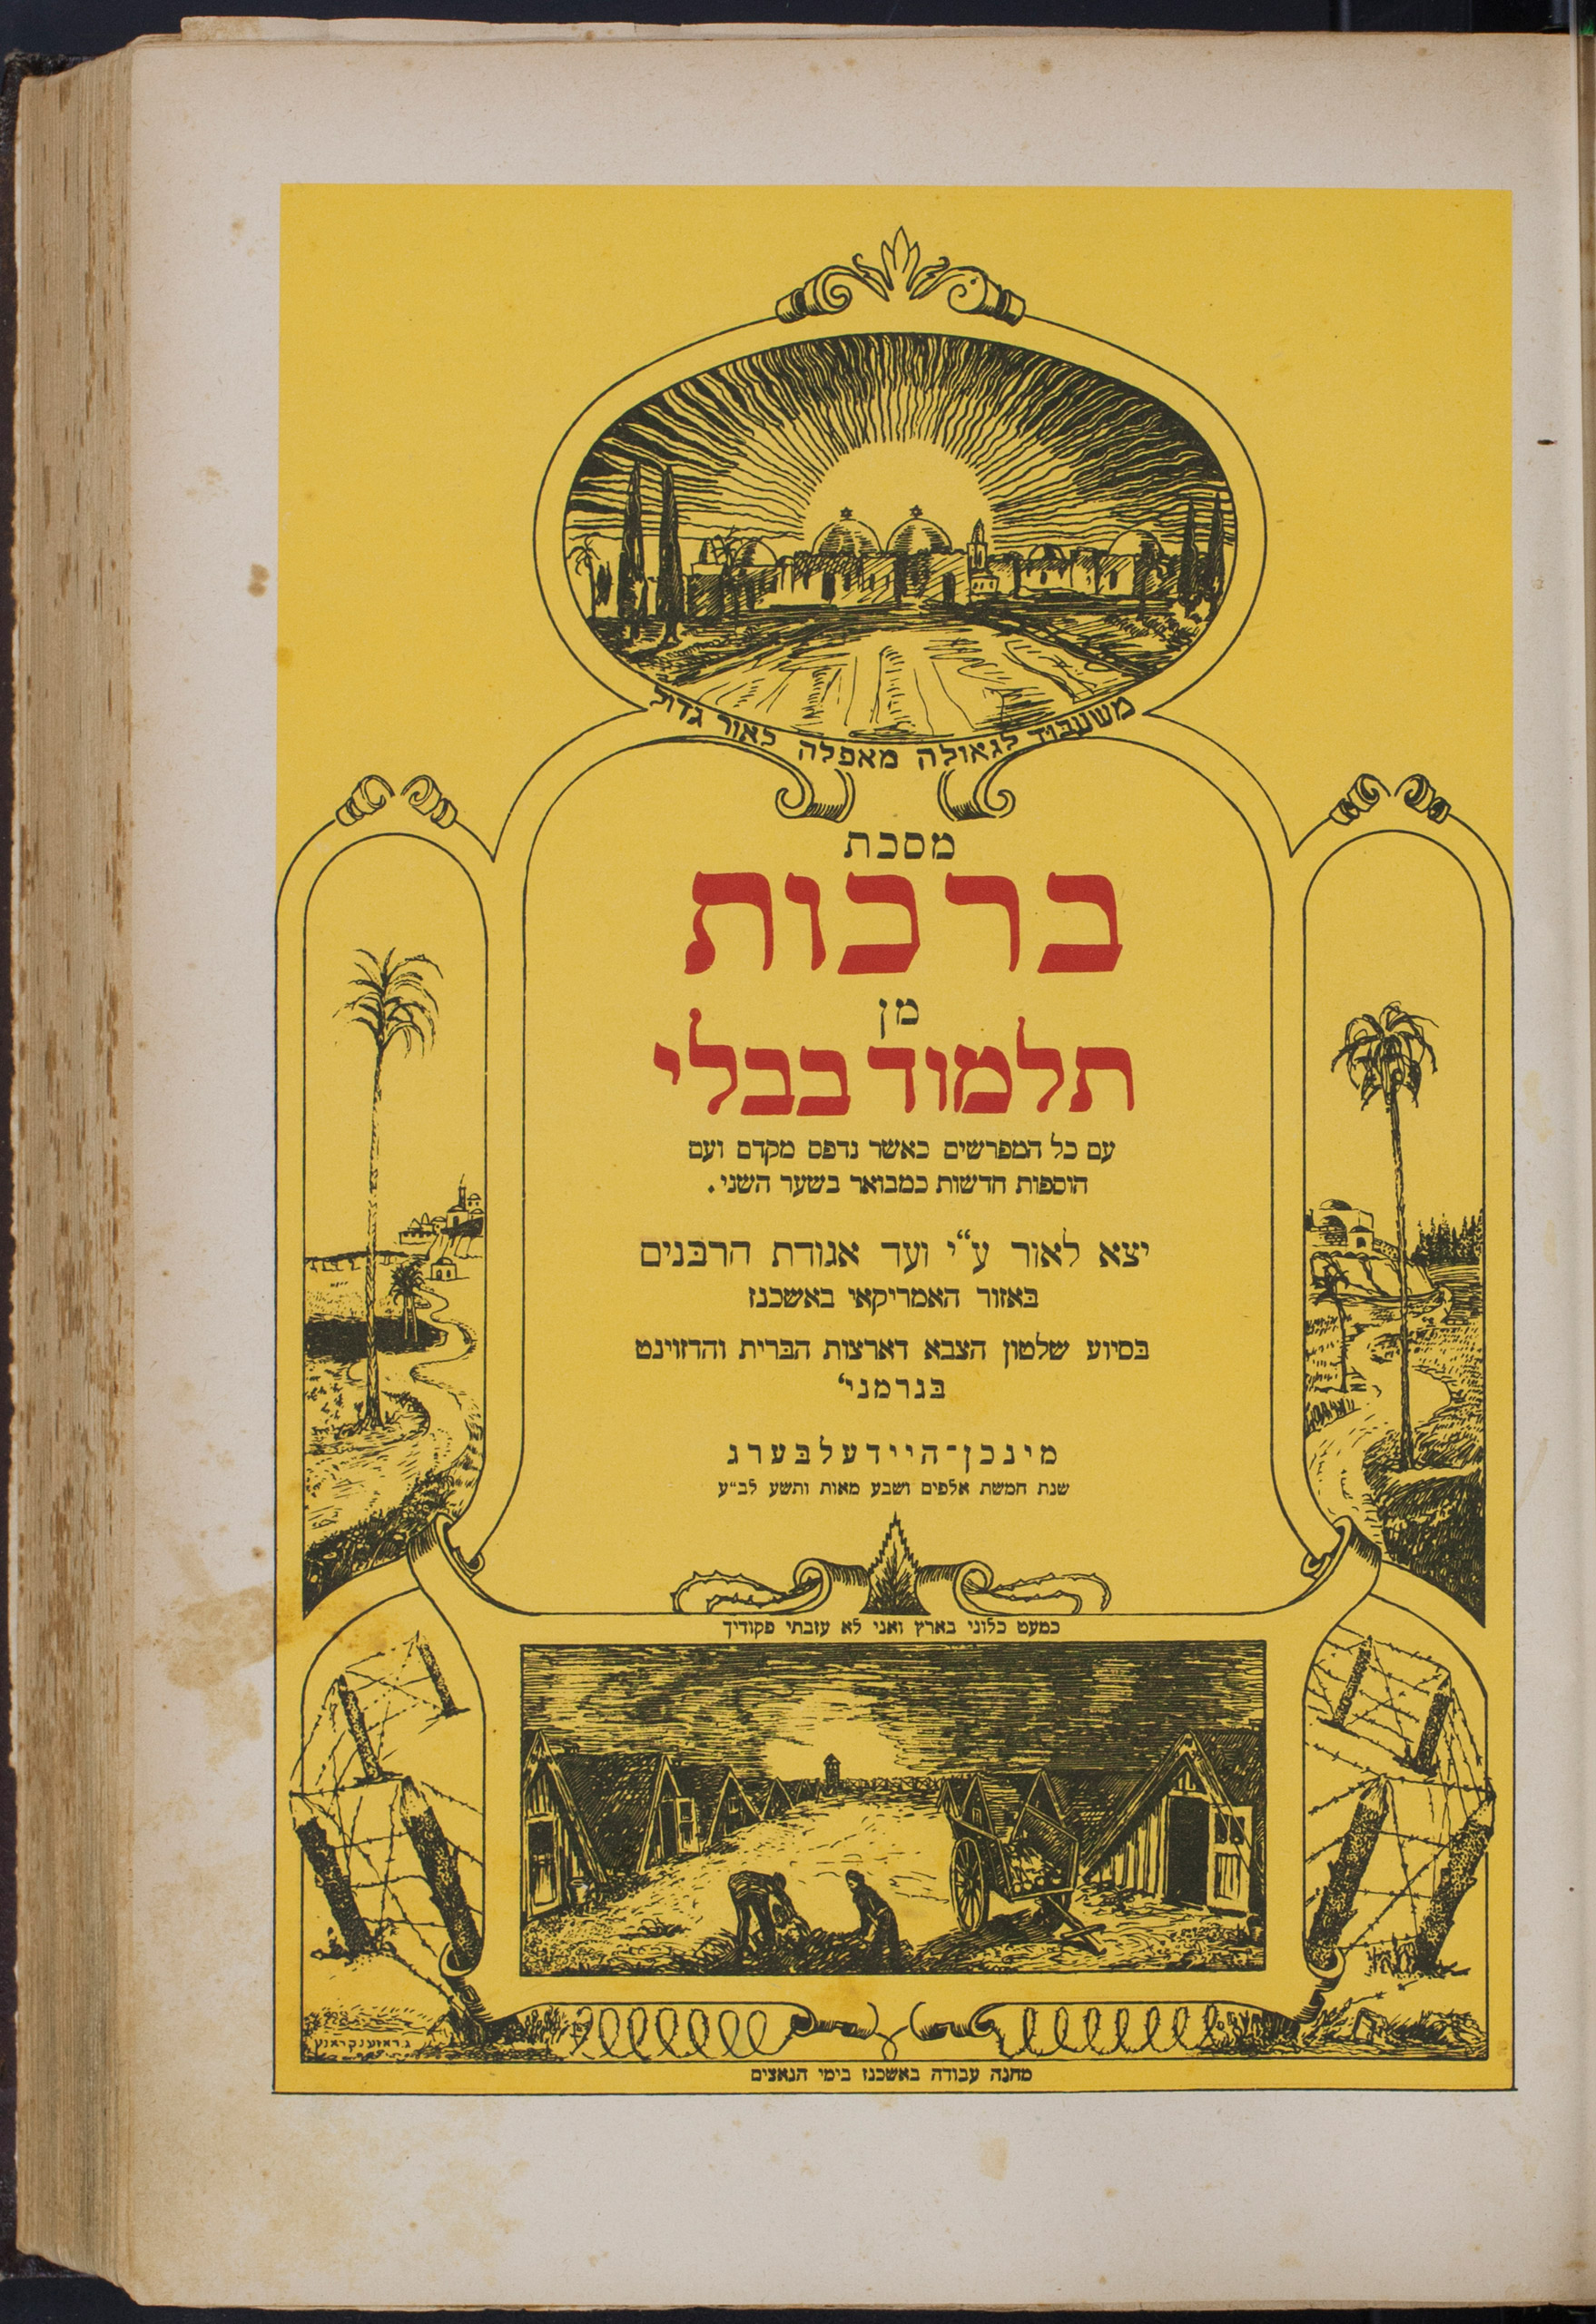 The title page of the Survivors' Talmud. (Courtesy of American Jewish Historical Society and Center for Jewish History)